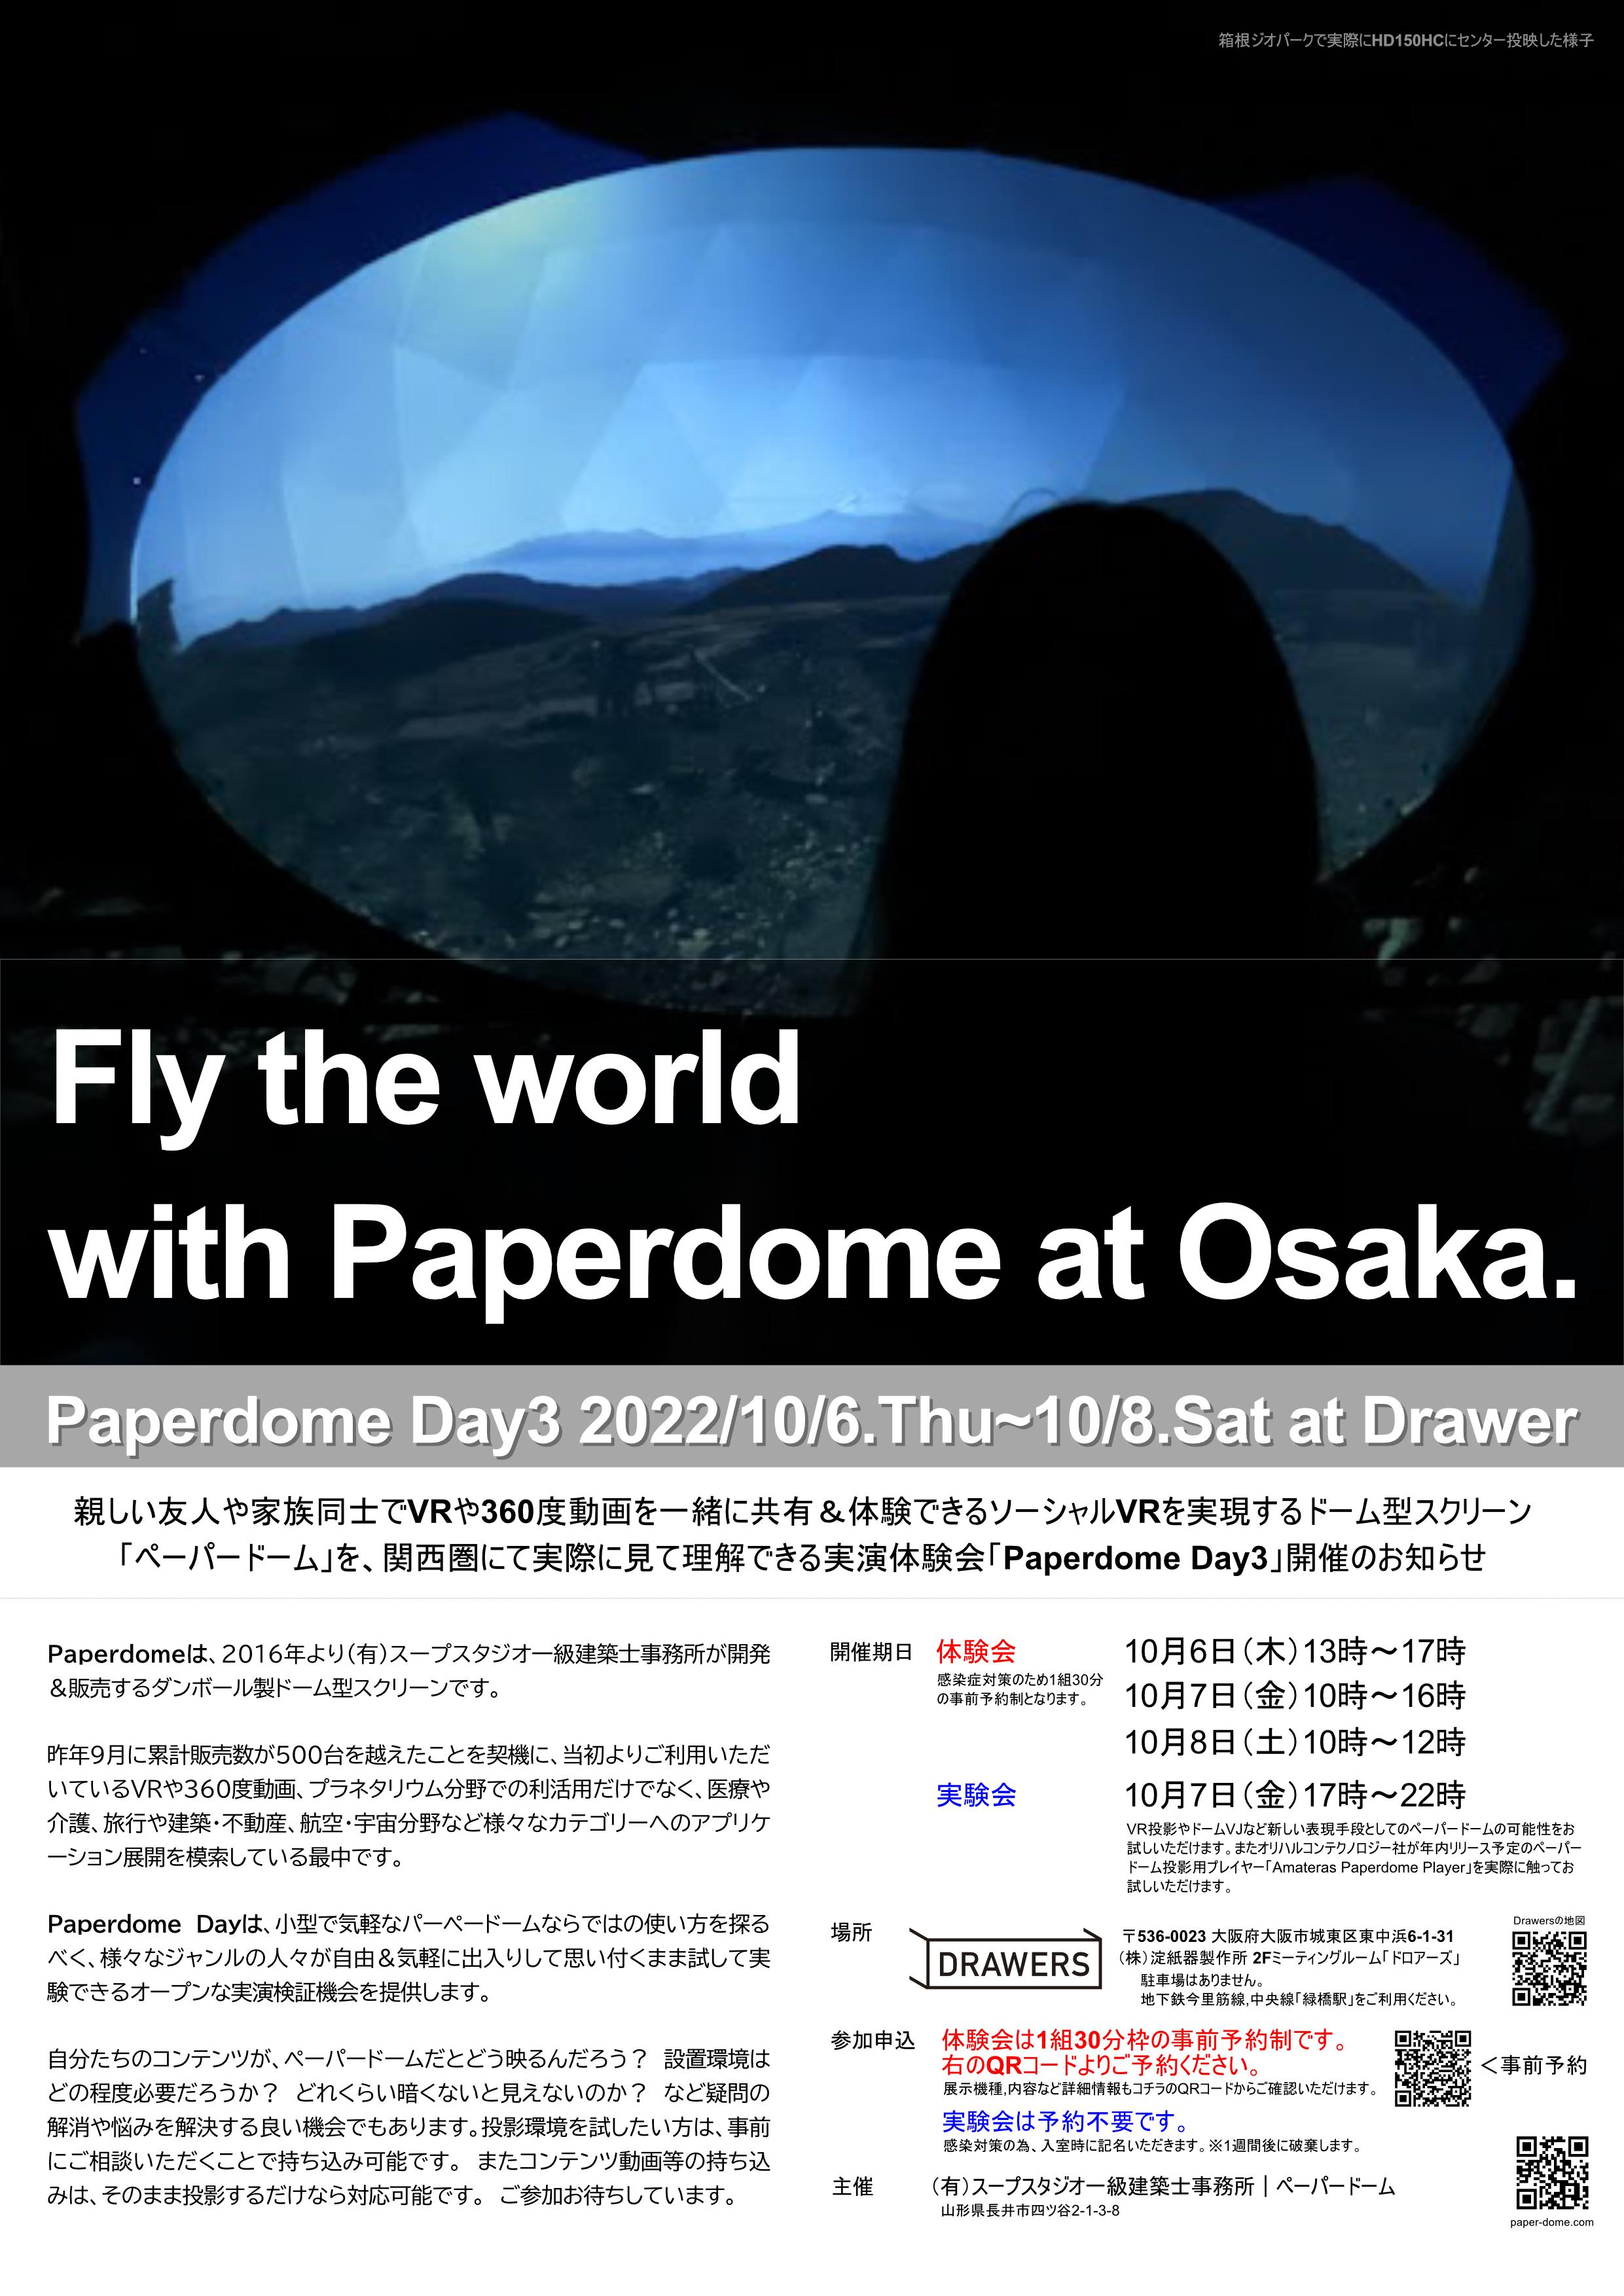 Paperdome Day3 in Osaka